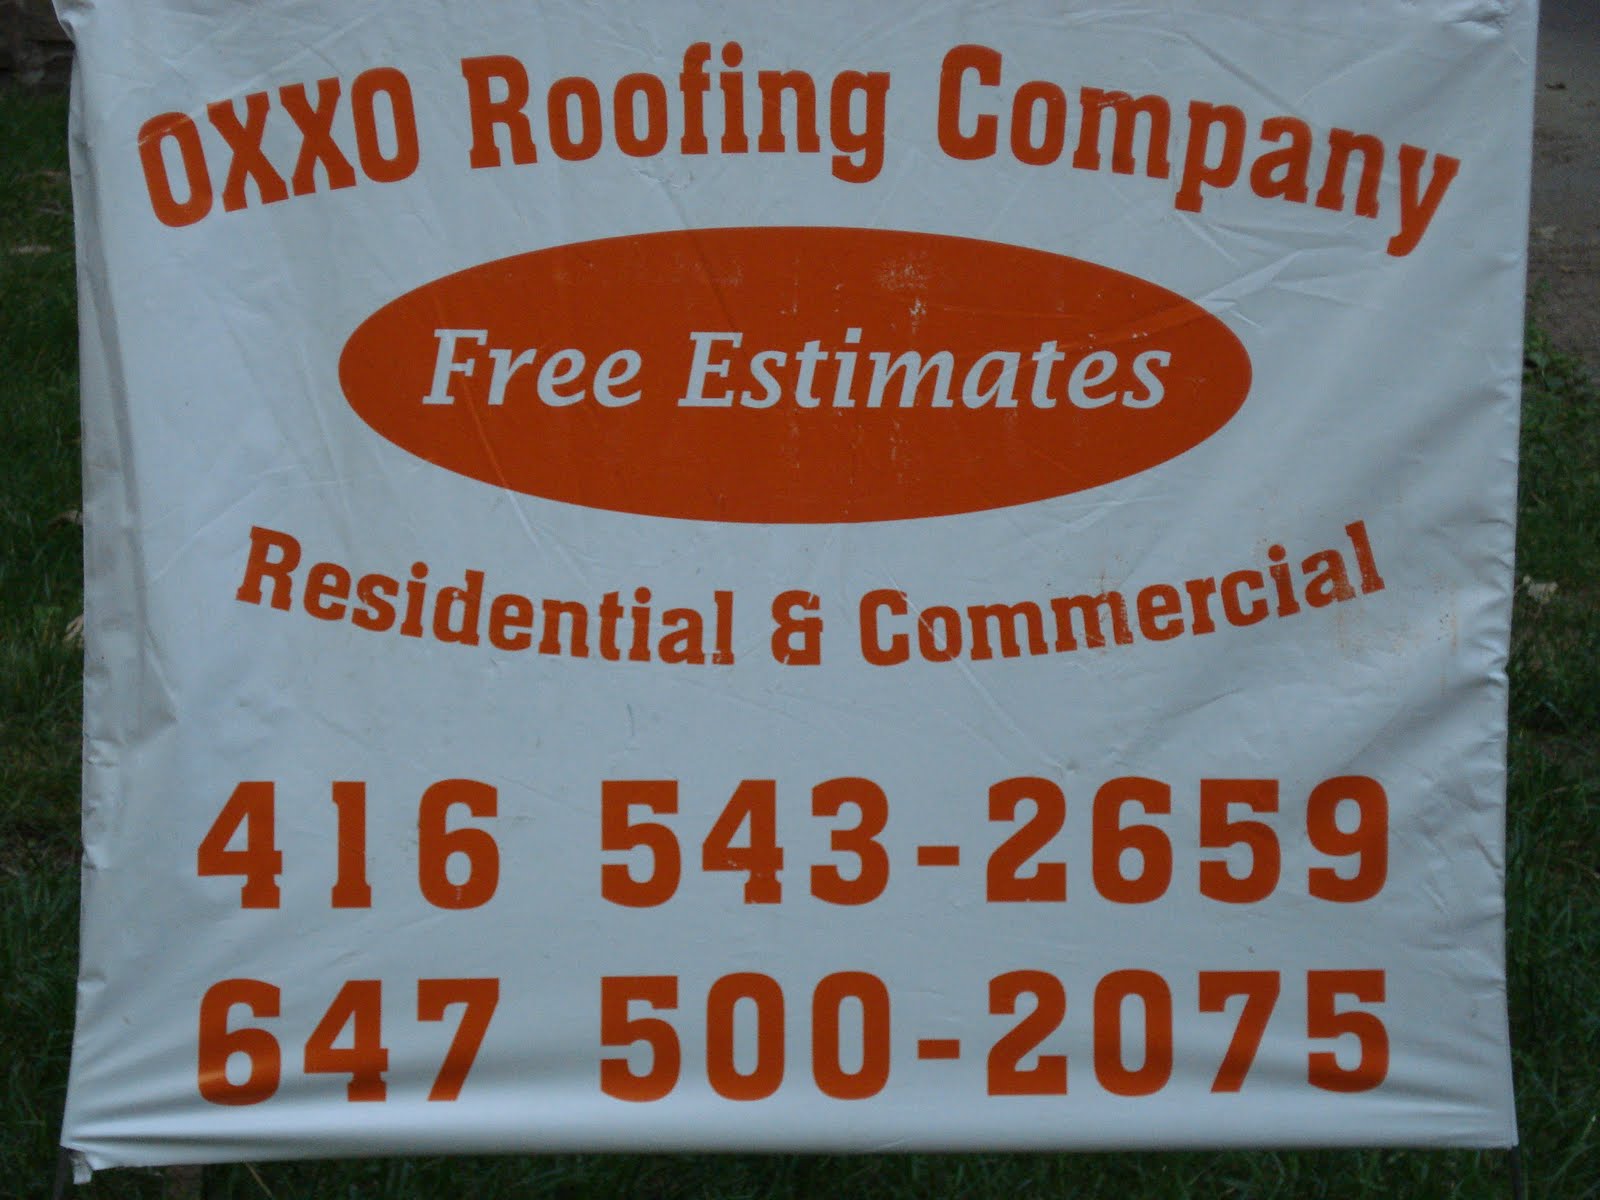 OXXO Roofing Company